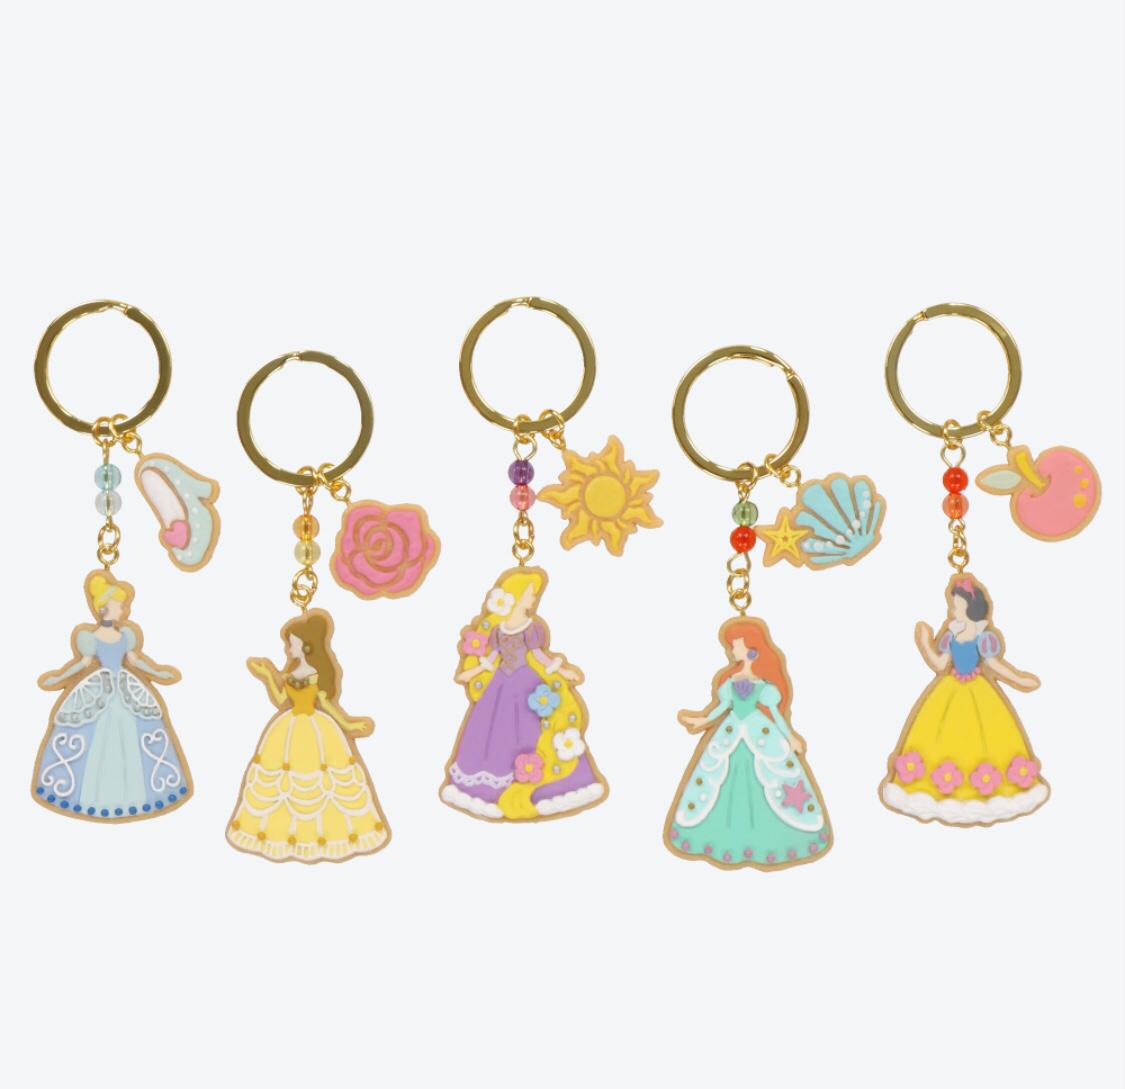 TRD - Keychain Collection - Princess cookie set of 5